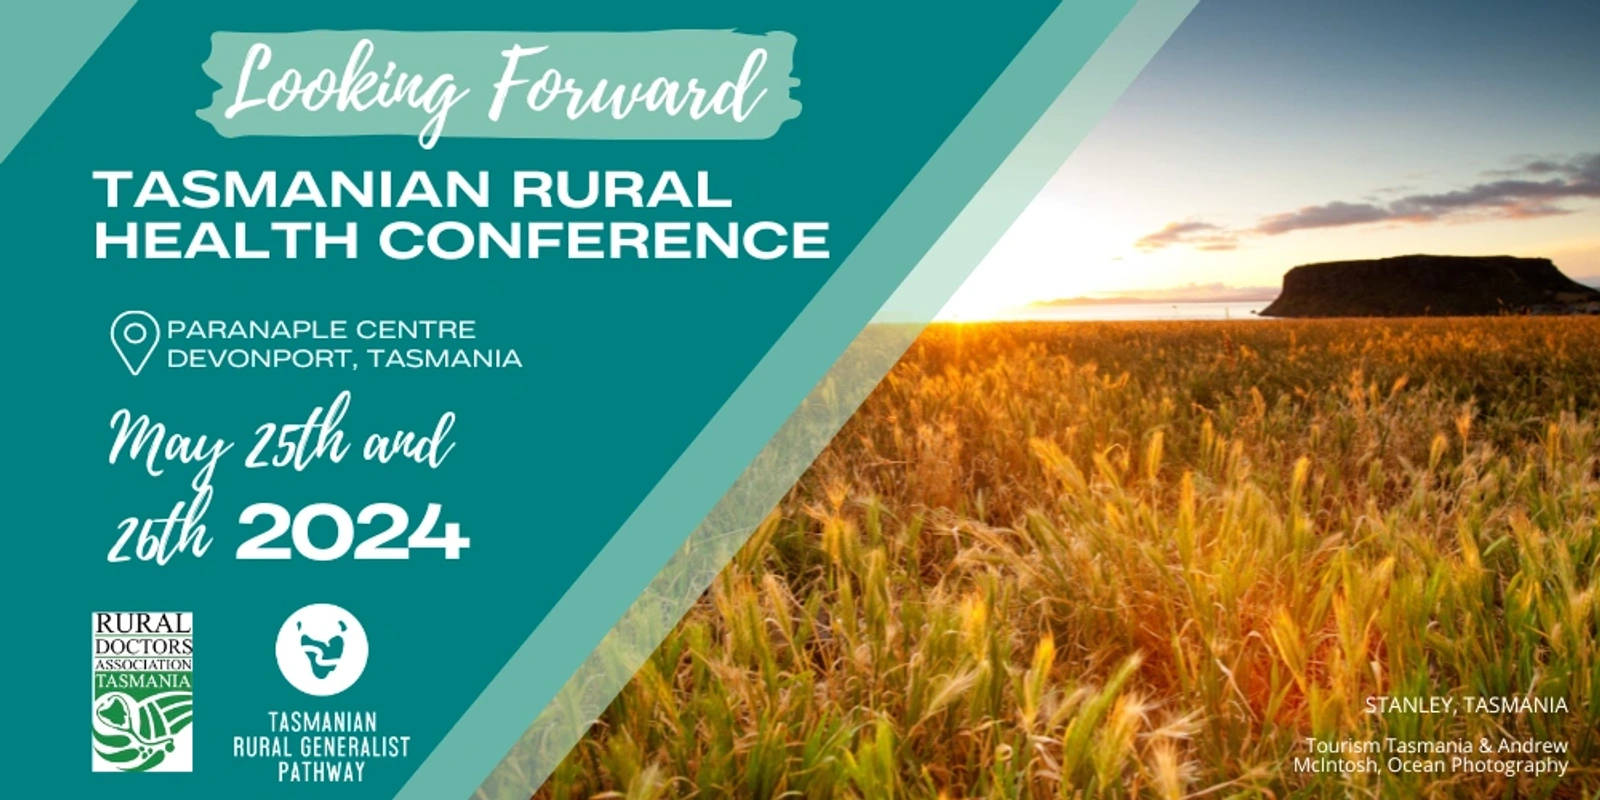 Graphic artwork for the Tasmanian Rural Health Conference 2024.